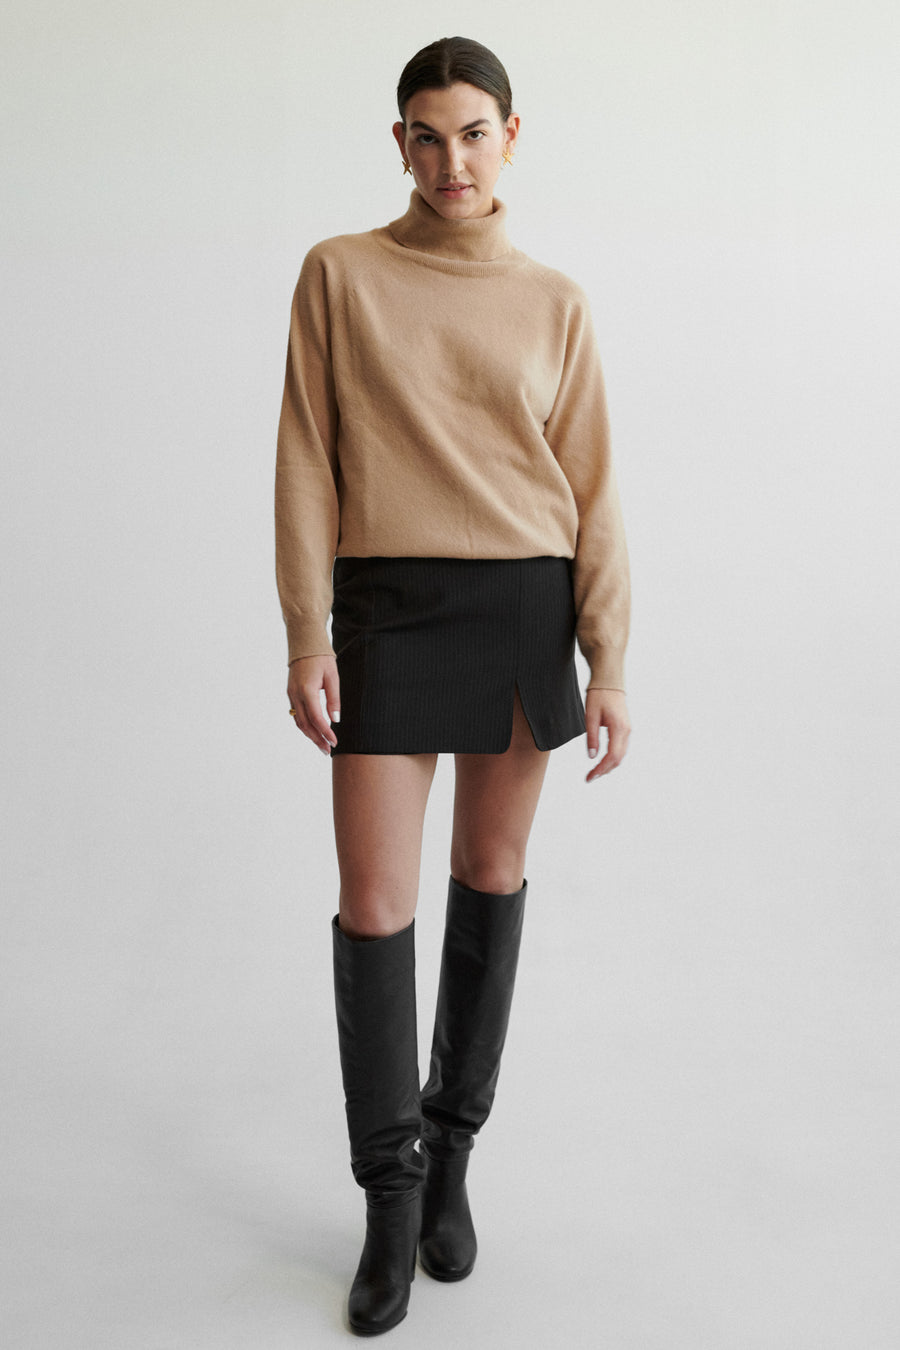 Skirt in virgin wool / 07 / 02 / calm brown *sweater-in-merino-wool-16-13-camel* ?the model is 179 cm tall and wears size XS?*